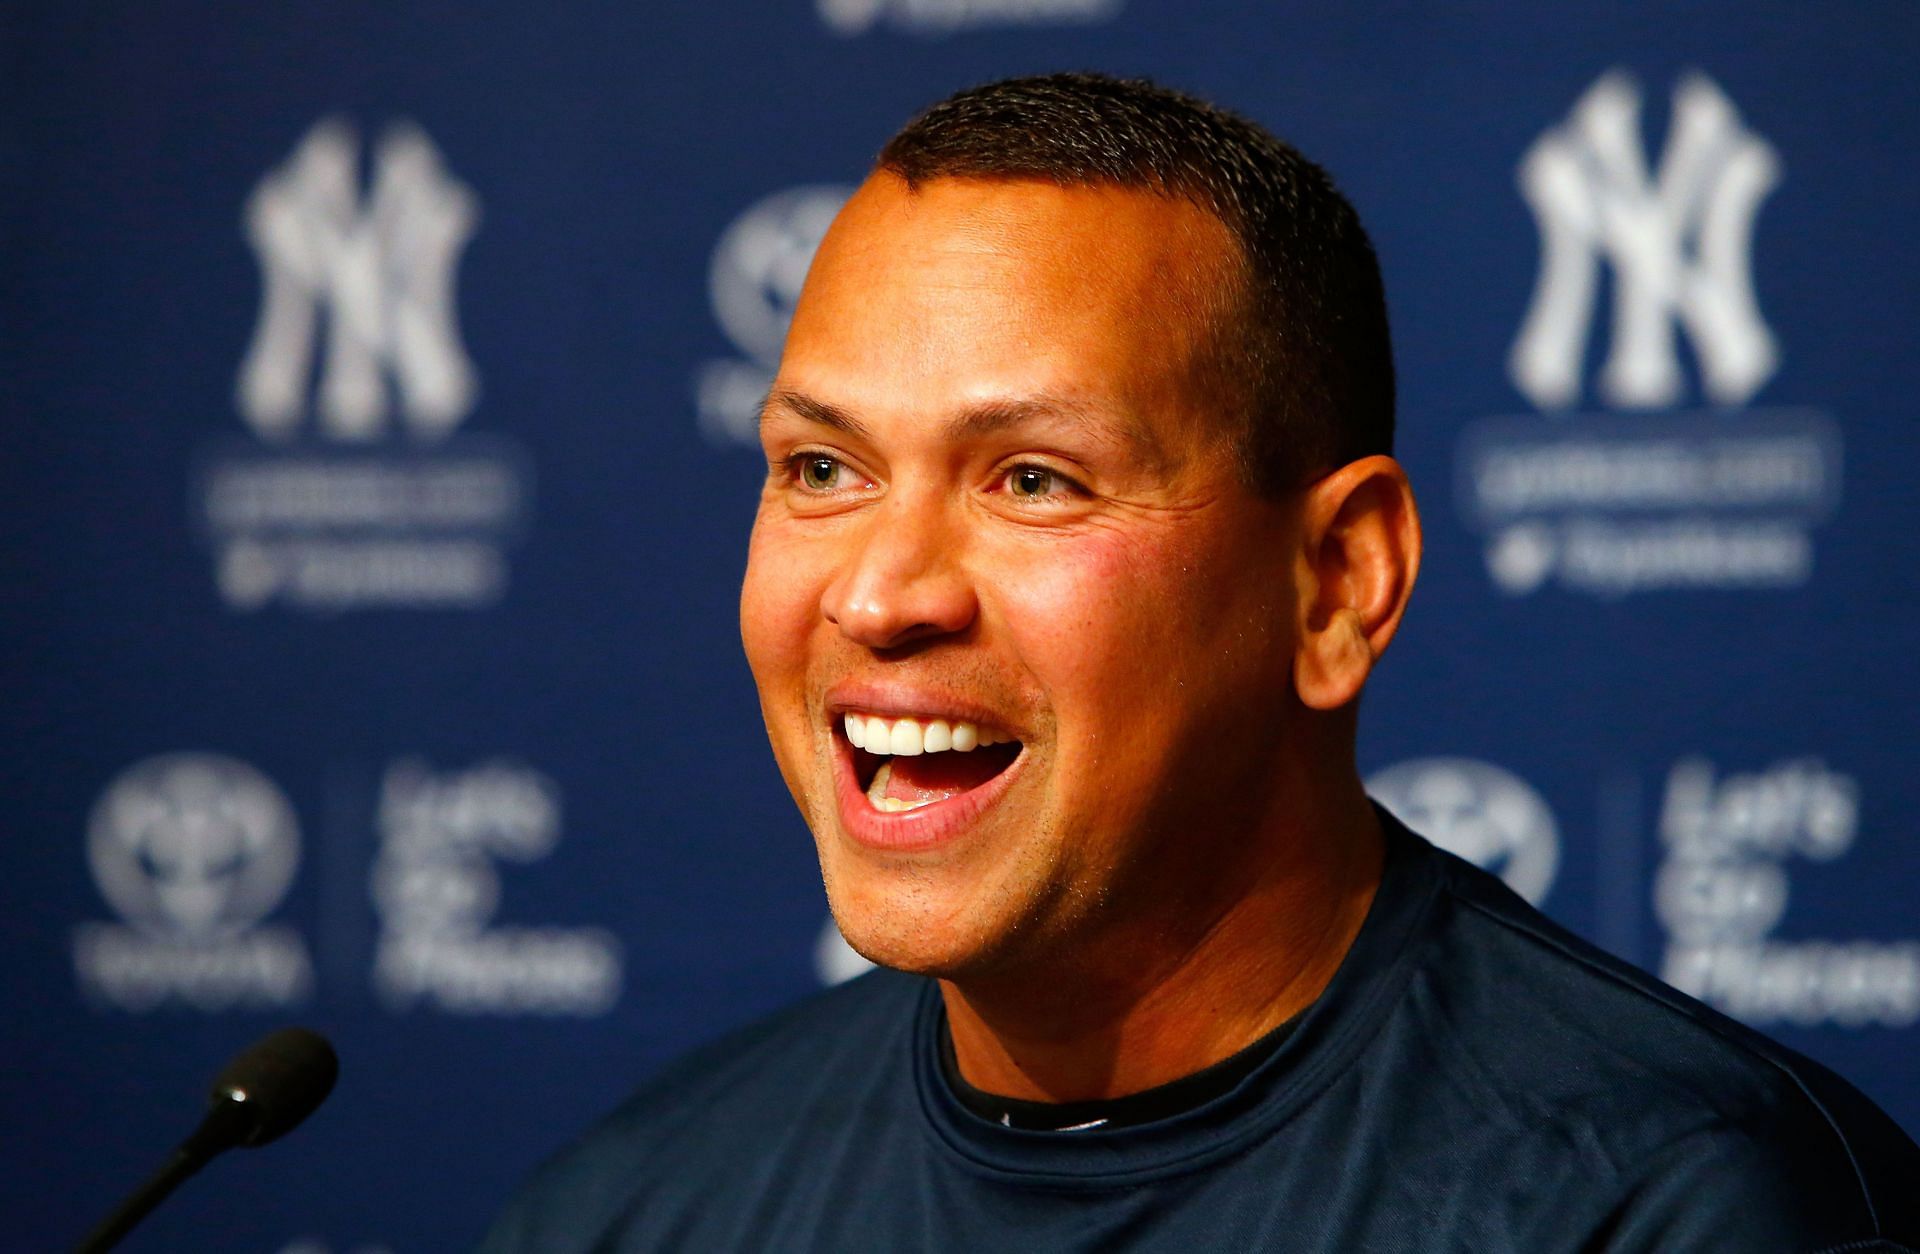 Alex Rodriguez during a press conference.